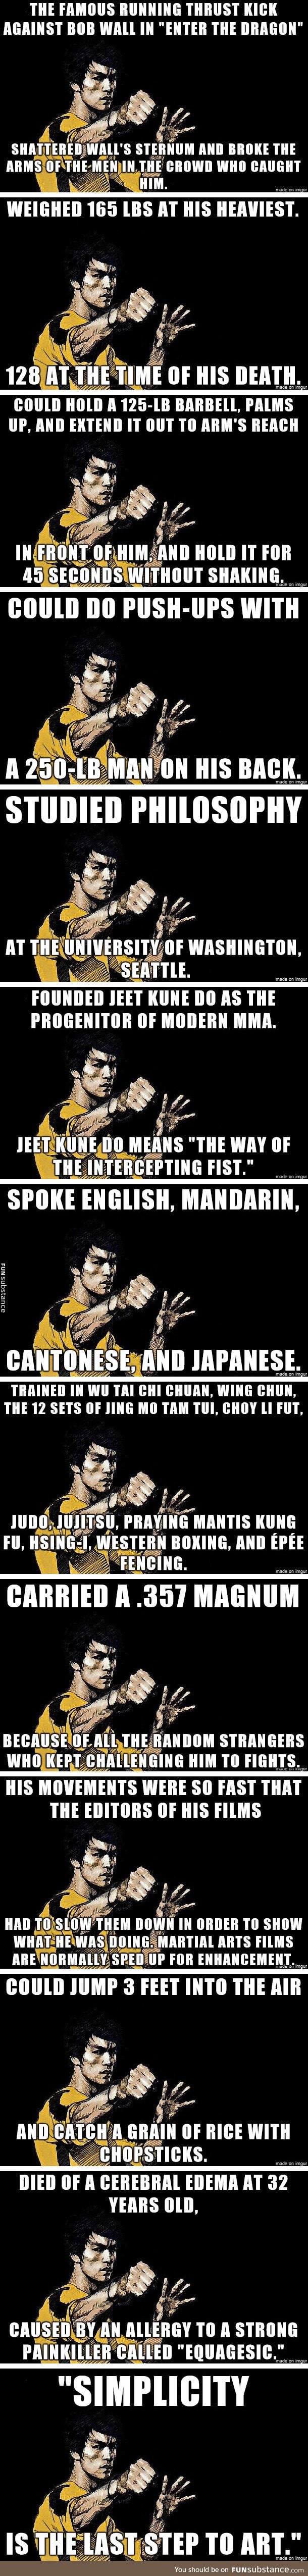 Bruce Lee facts